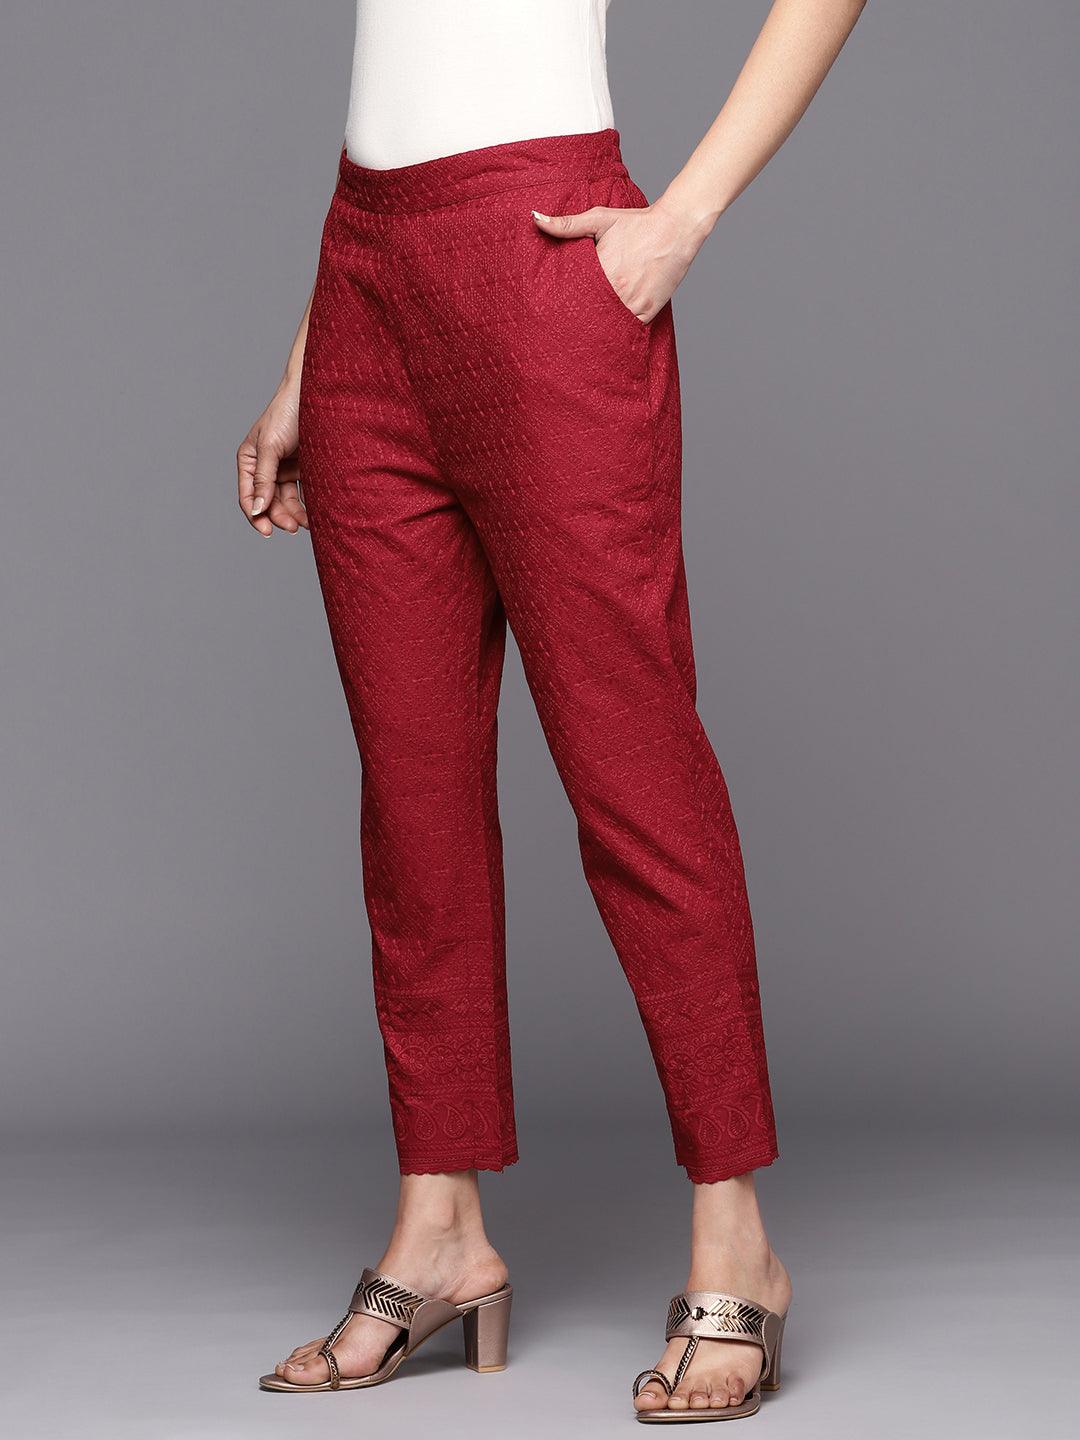 Discover more than 65 new trouser design for girl - in.cdgdbentre